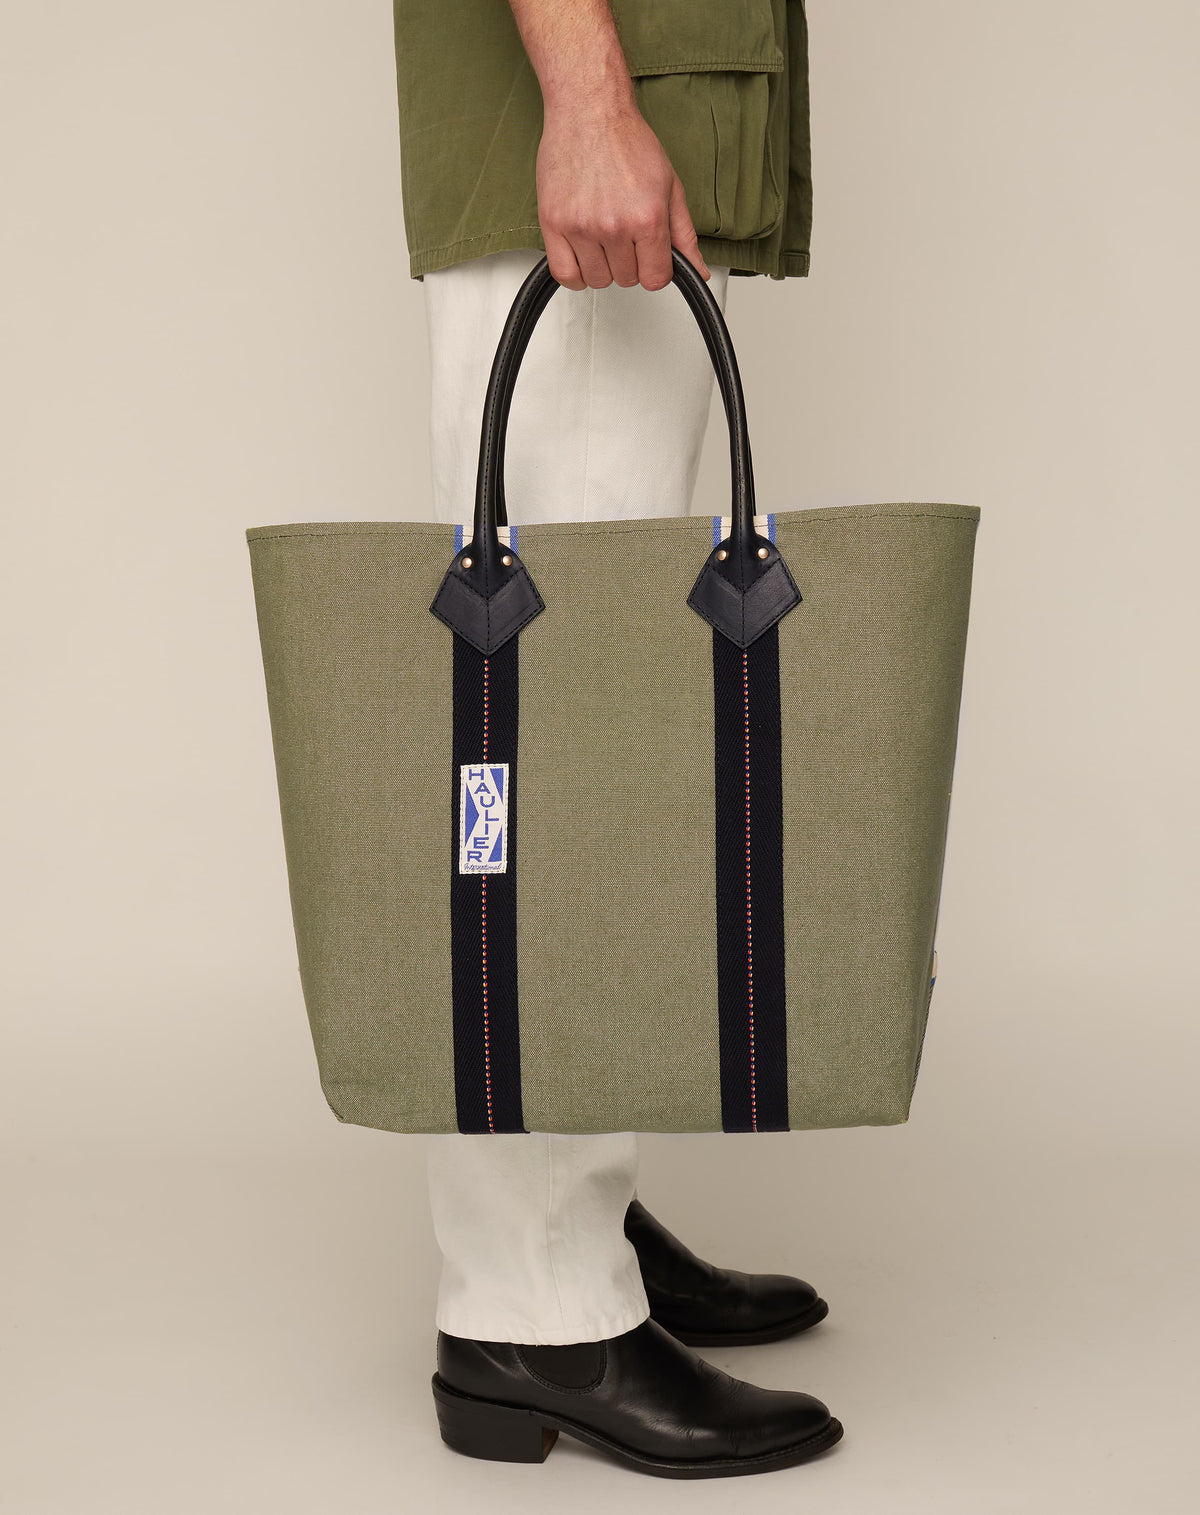 Image of person in black boots and white trousers holding medium-sized classic canvas tote bag in sage colour with black leather handles and contrasting stripes.